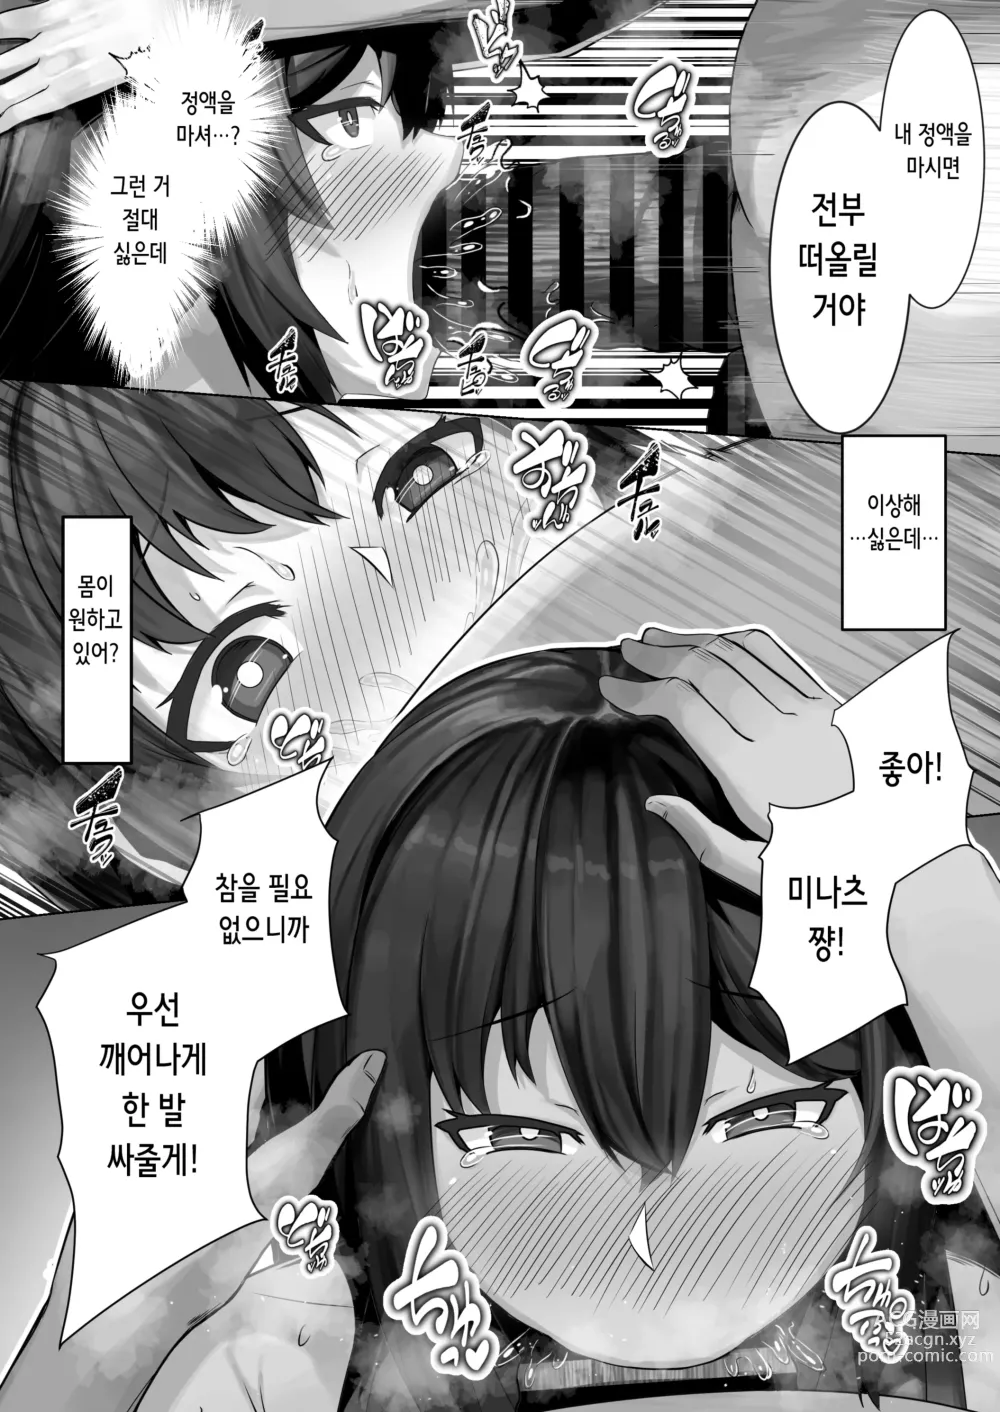 Page 24 of doujinshi 최면 이웃 JD 2